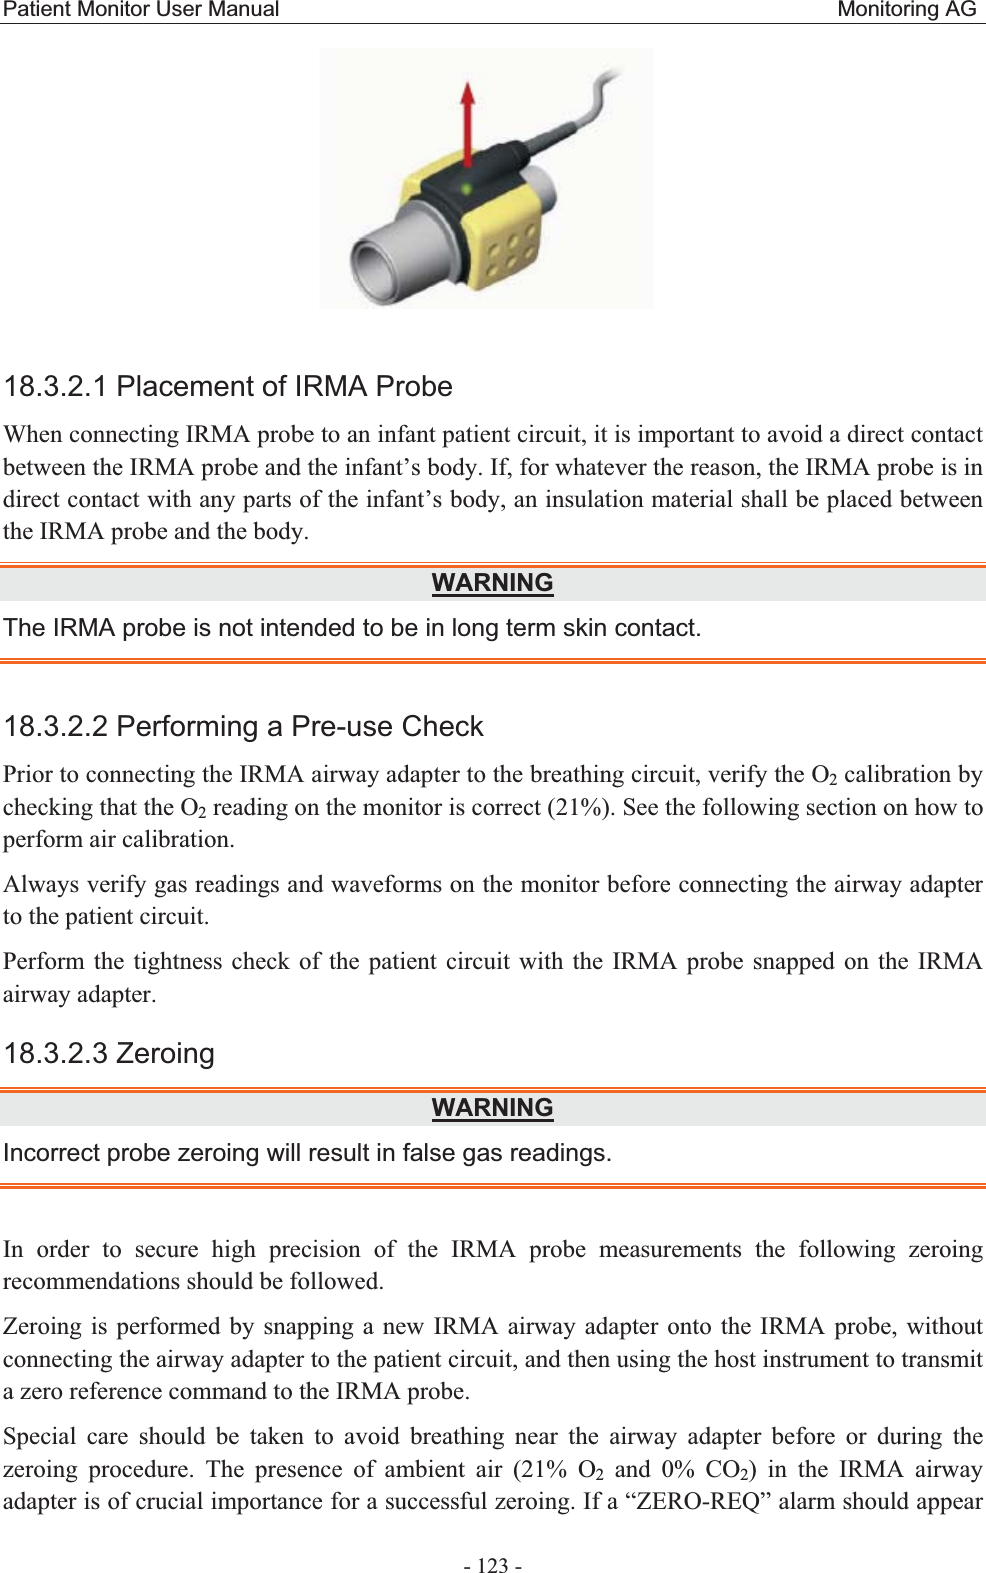 Patient Monitor User Manual                                                   Monitoring AG  - 123 -   18.3.2.1 Placement of IRMA Probe When connecting IRMA probe to an infant patient circuit, it is important to avoid a direct contact between the IRMA probe and the infant’s body. If, for whatever the reason, the IRMA probe is in direct contact with any parts of the infant’s body, an insulation material shall be placed between the IRMA probe and the body. WARNINGThe IRMA probe is not intended to be in long term skin contact. 18.3.2.2 Performing a Pre-use Check Prior to connecting the IRMA airway adapter to the breathing circuit, verify the O2 calibration by checking that the O2 reading on the monitor is correct (21%). See the following section on how to perform air calibration. Always verify gas readings and waveforms on the monitor before connecting the airway adapter to the patient circuit. Perform the tightness check of the patient circuit with the IRMA probe snapped on the IRMA airway adapter. 18.3.2.3 Zeroing   WARNINGIncorrect probe zeroing will result in false gas readings. In order to secure high precision of the IRMA probe measurements the following zeroing recommendations should be followed. Zeroing is performed by snapping a new IRMA airway adapter onto the IRMA probe, without connecting the airway adapter to the patient circuit, and then using the host instrument to transmit a zero reference command to the IRMA probe. Special care should be taken to avoid breathing near the airway adapter before or during the zeroing procedure. The presence of ambient air (21% O2 and 0% CO2) in the IRMA airway adapter is of crucial importance for a successful zeroing. If a “ZERO-REQ” alarm should appear 